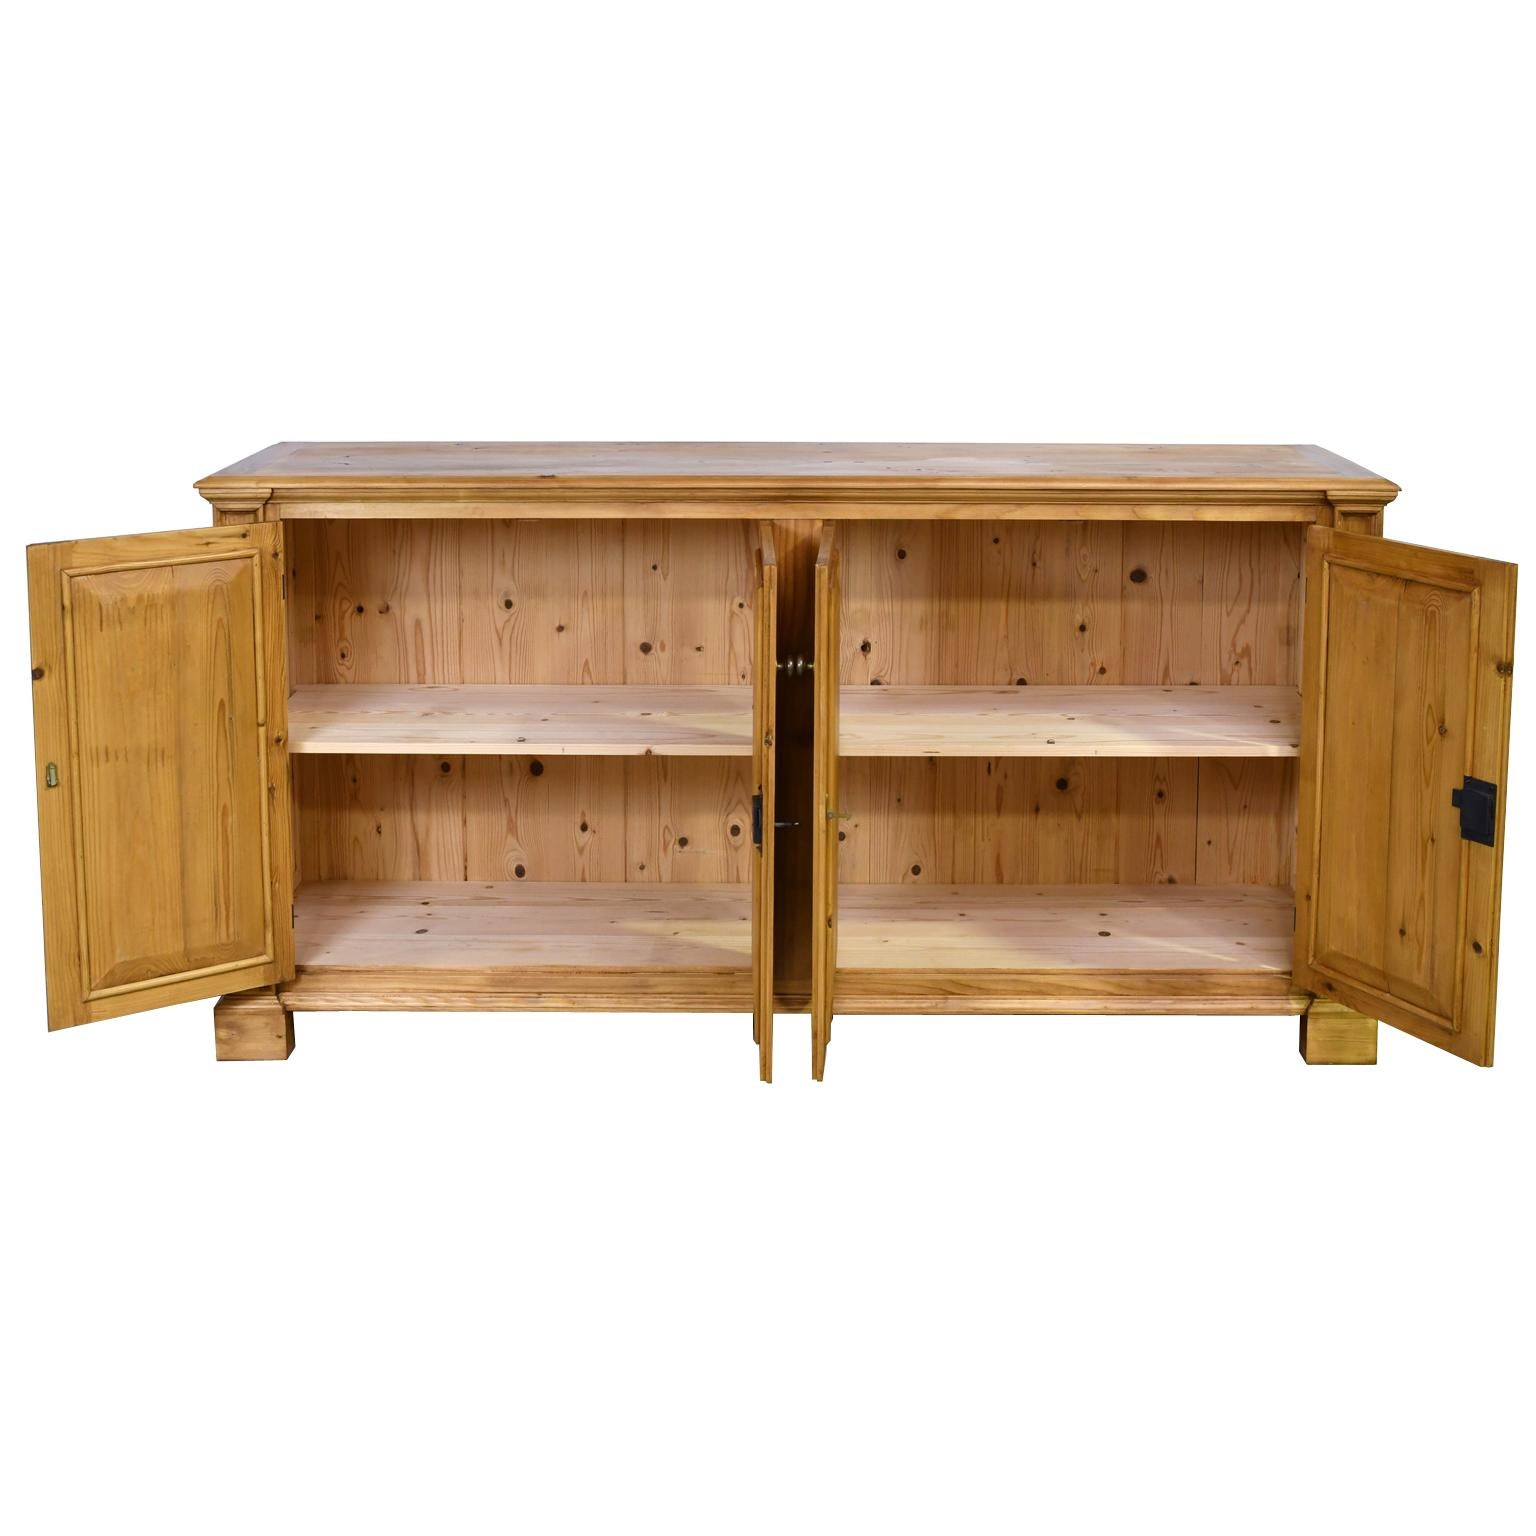 A Bonnin Ashley custom-made sideboard, with four cabinet doors, floating side panels and a sandwich board top. All of the joinery is mortice and Tenon construction and all floating panels are chamfered including the back of the cabinet with tongue